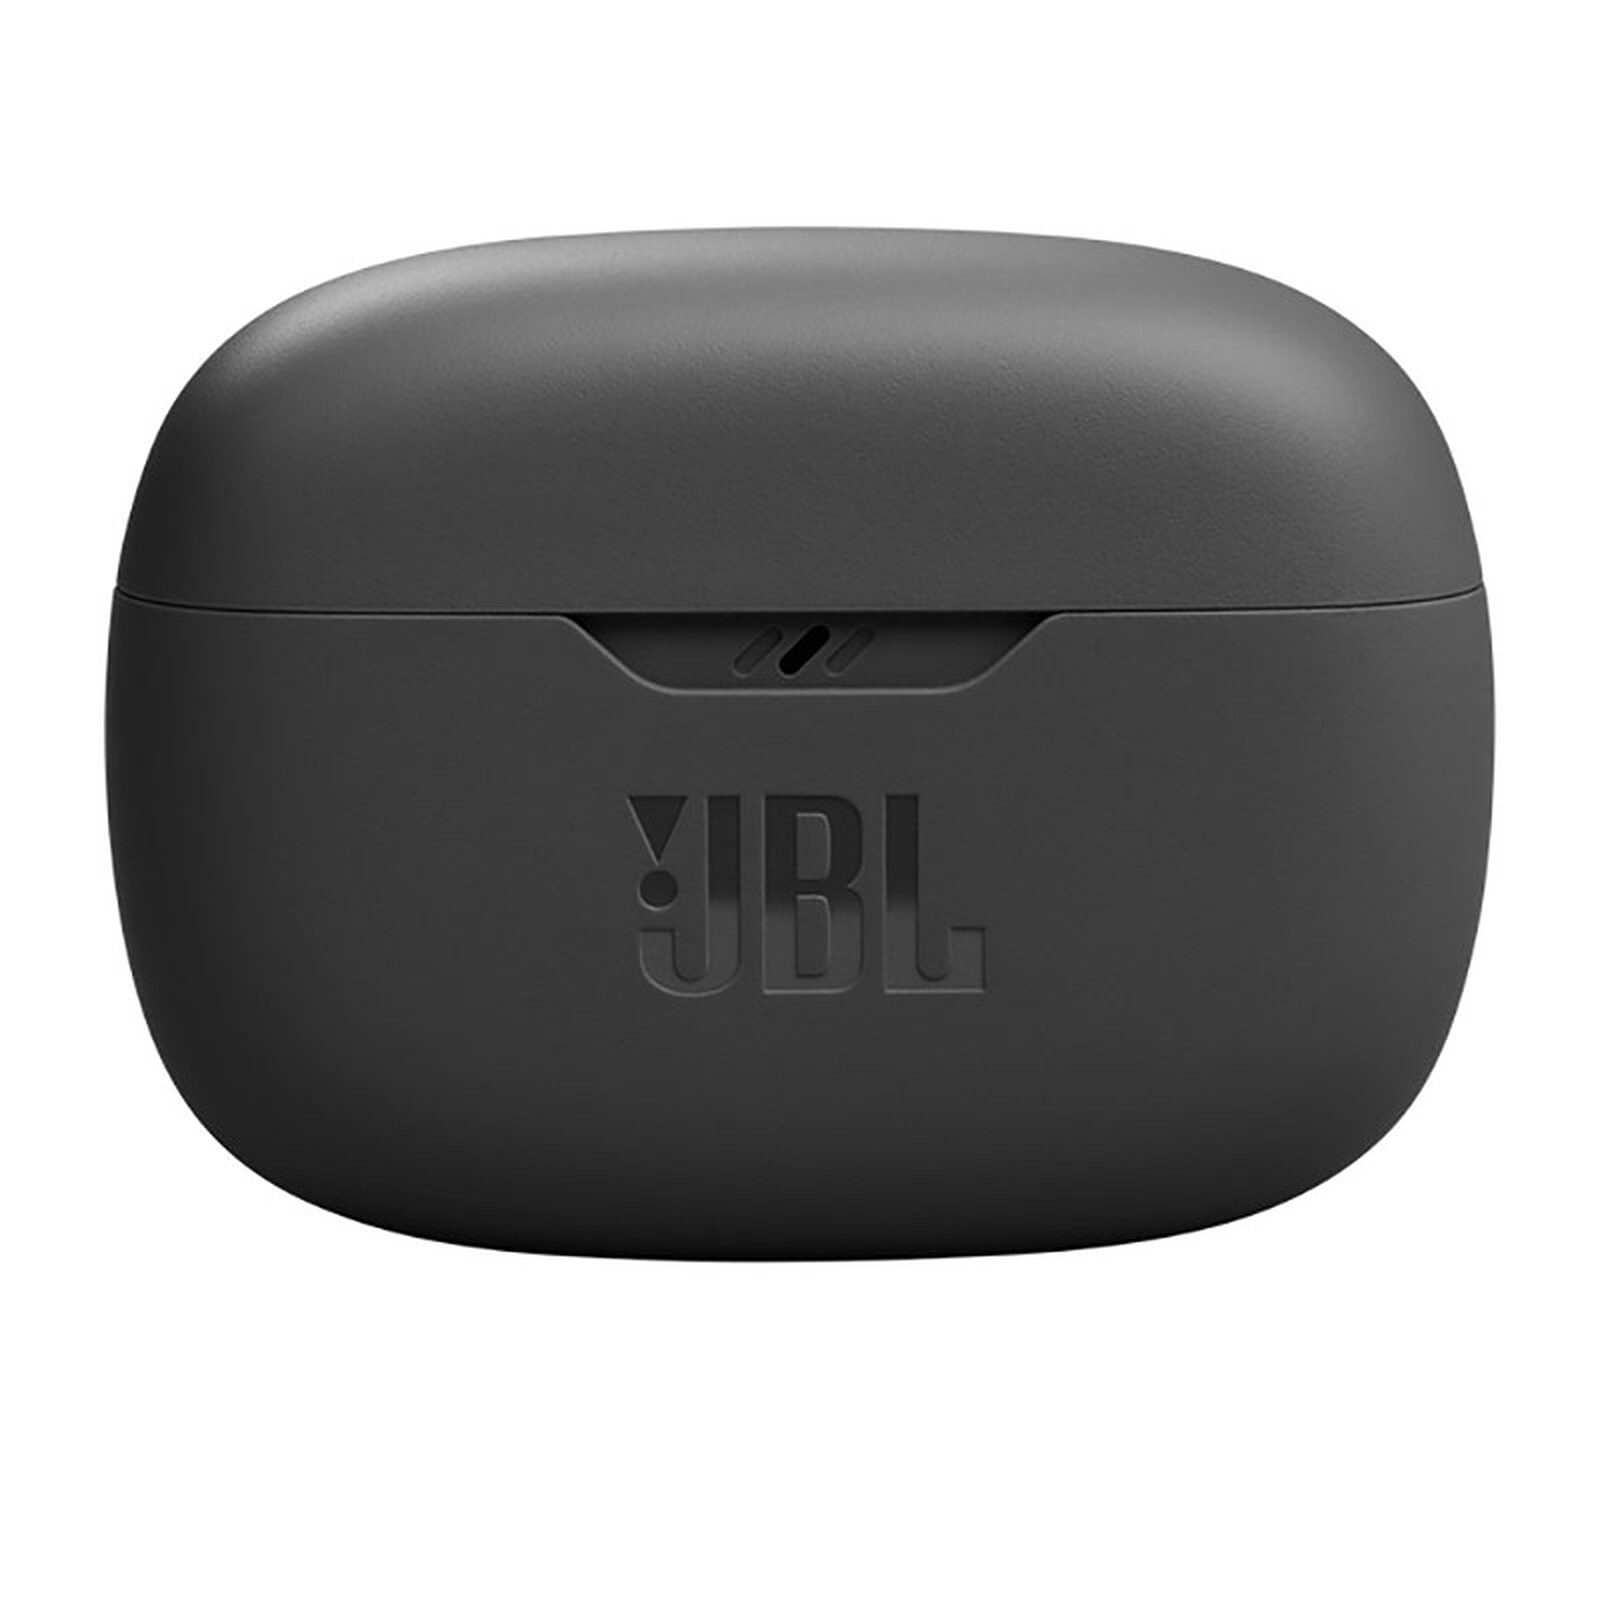 Auriculares JBL Wave 300 TWS Bluetooth White